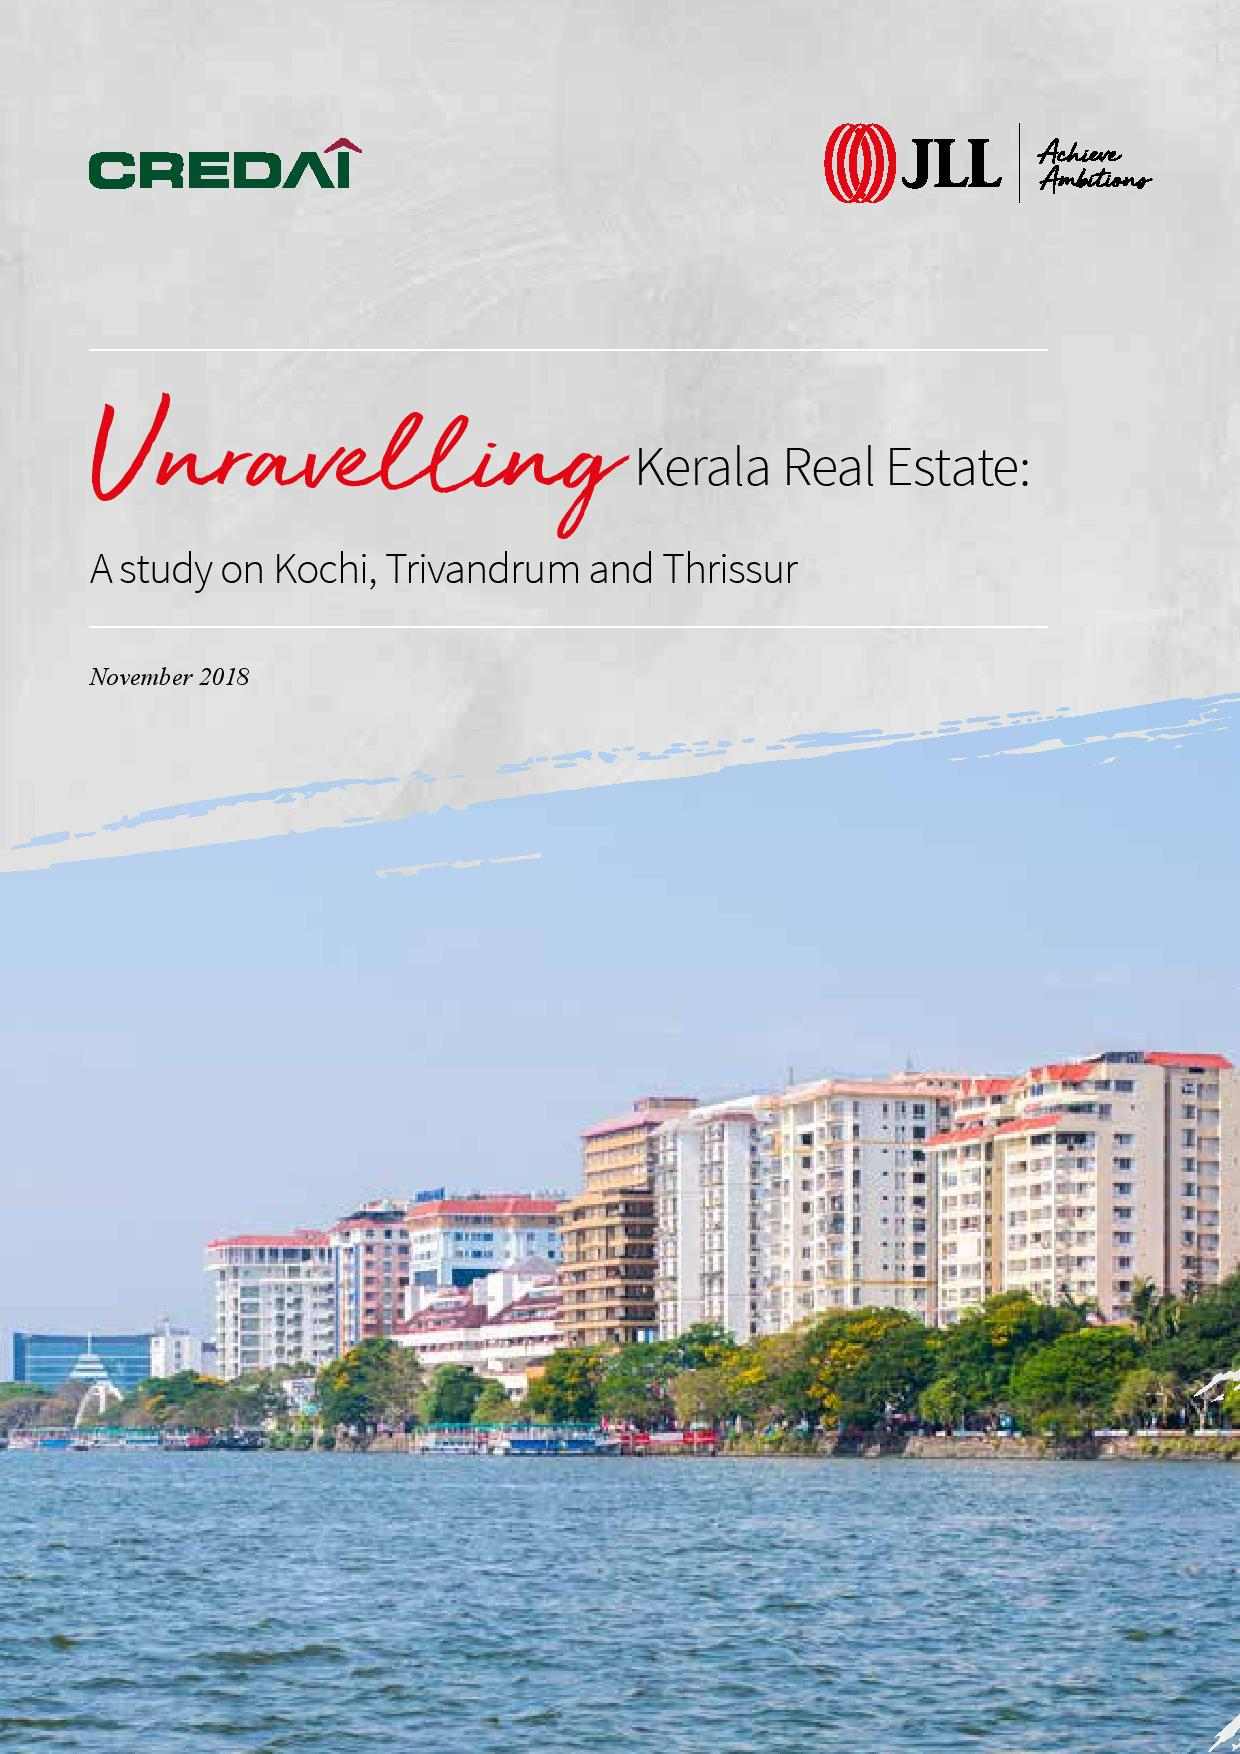 Unravelling Kerala Real Estate: A study on Kochi, Trivandrum and Thrissur Update